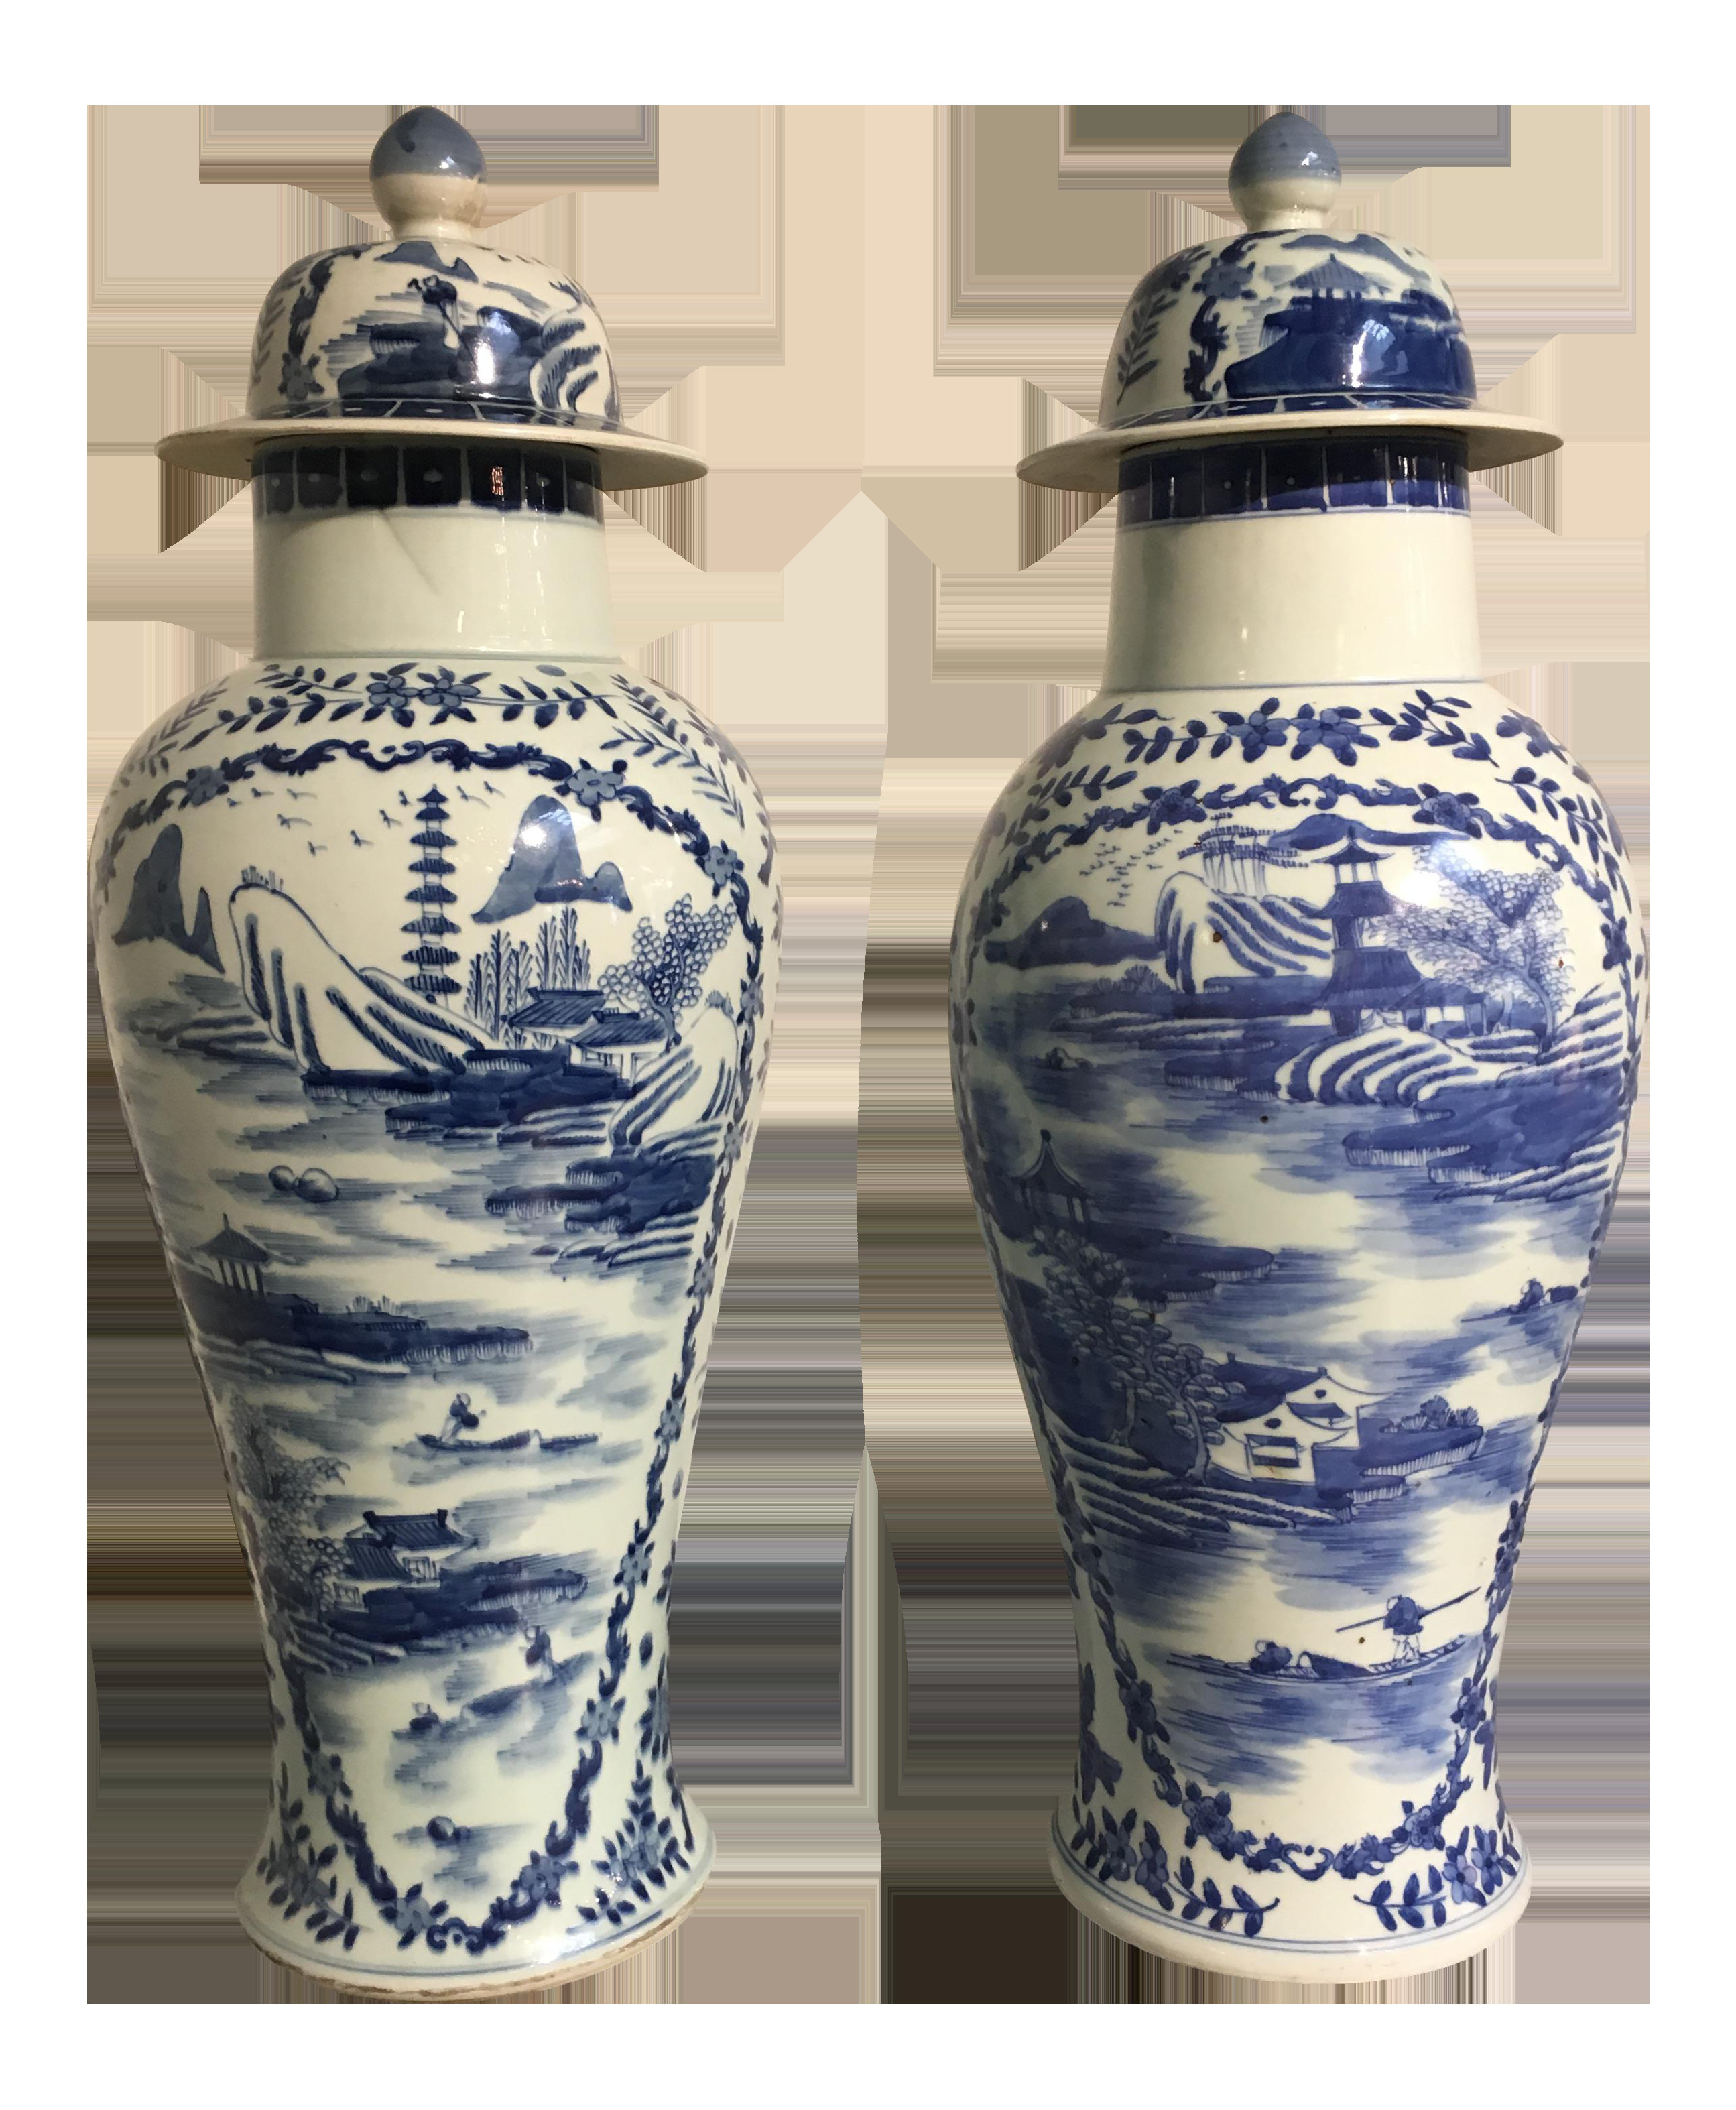 20 Fabulous Chinese Porcelain Vases for Sale 2022 free download chinese porcelain vases for sale of world class chinese tall blue and white baluster covered porcelain throughout world class chinese tall blue and white baluster covered porcelain vases cir